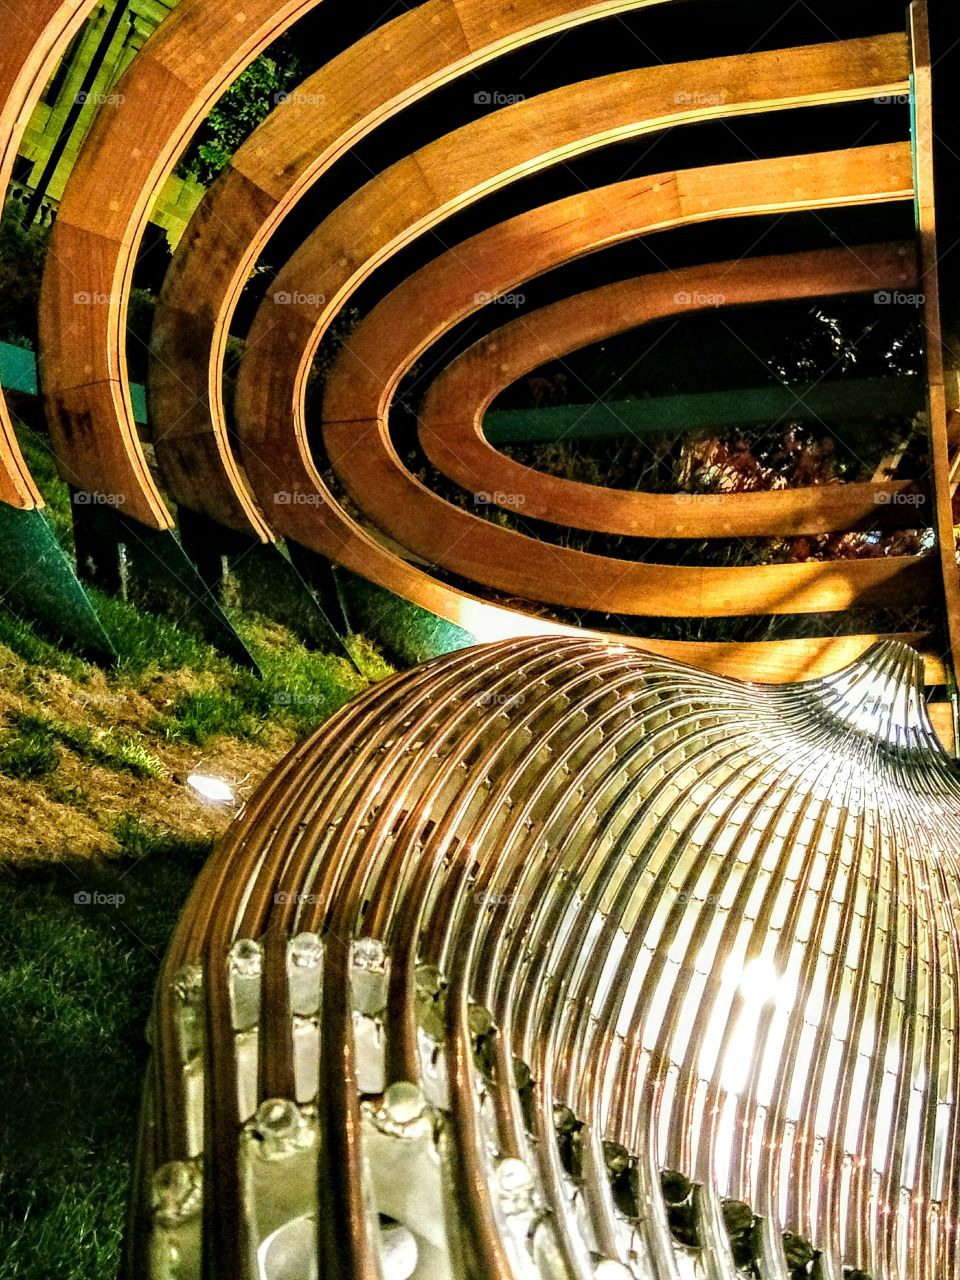 sculpture in city park at night